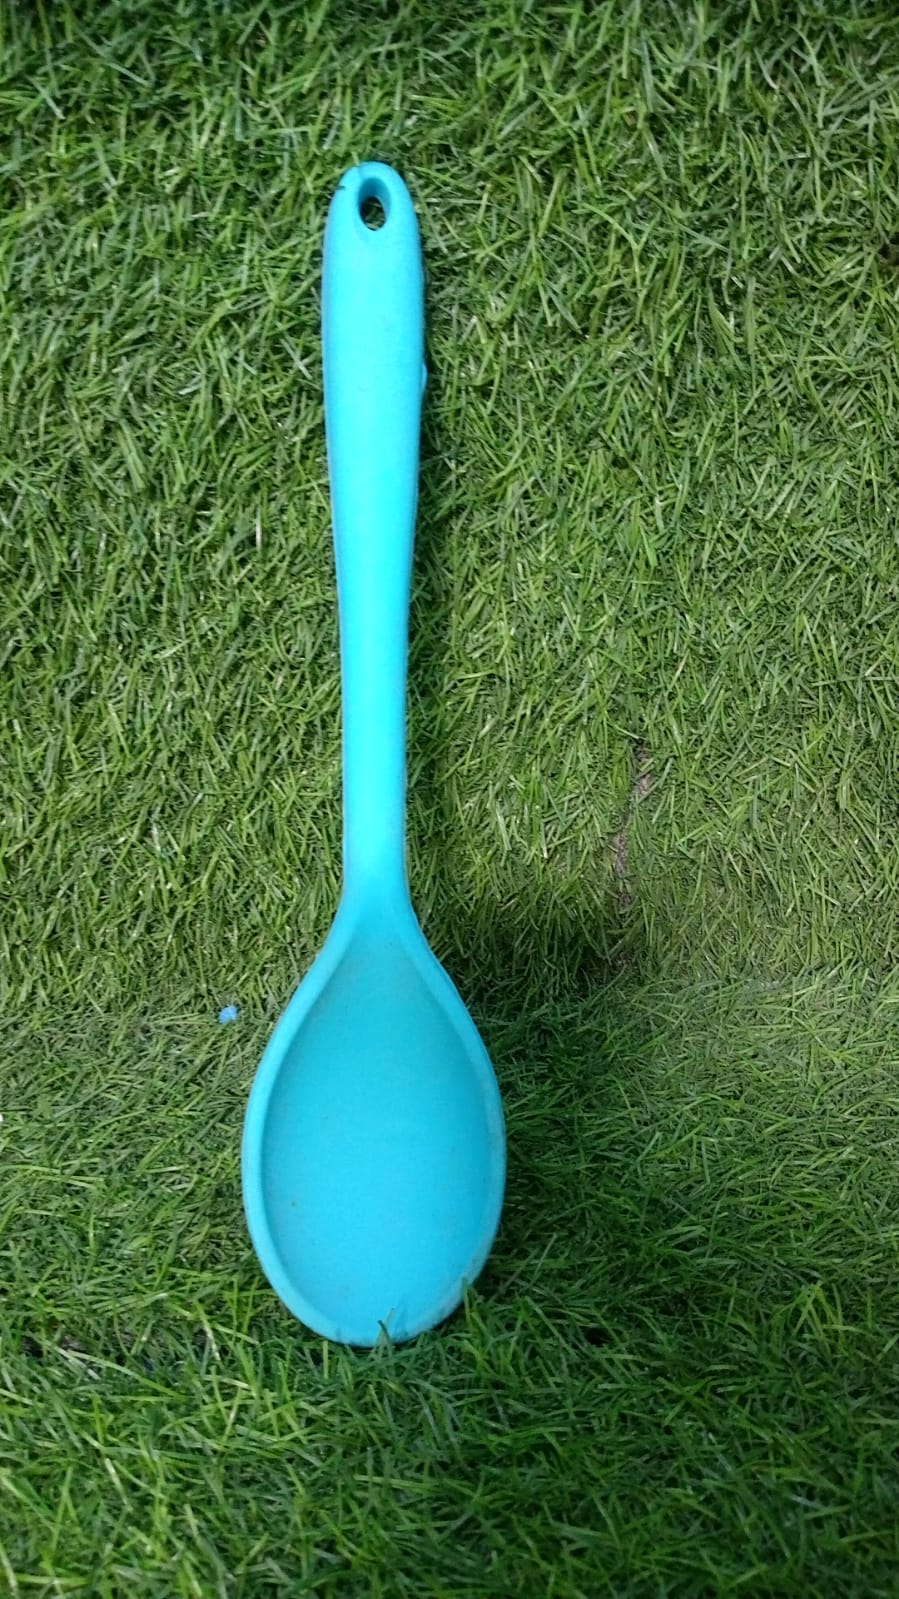 5458 Large Silicone Spoon for Baking, Serving, Basting - Heat Resistant, Non Stick Utensil Spoon (27cm)